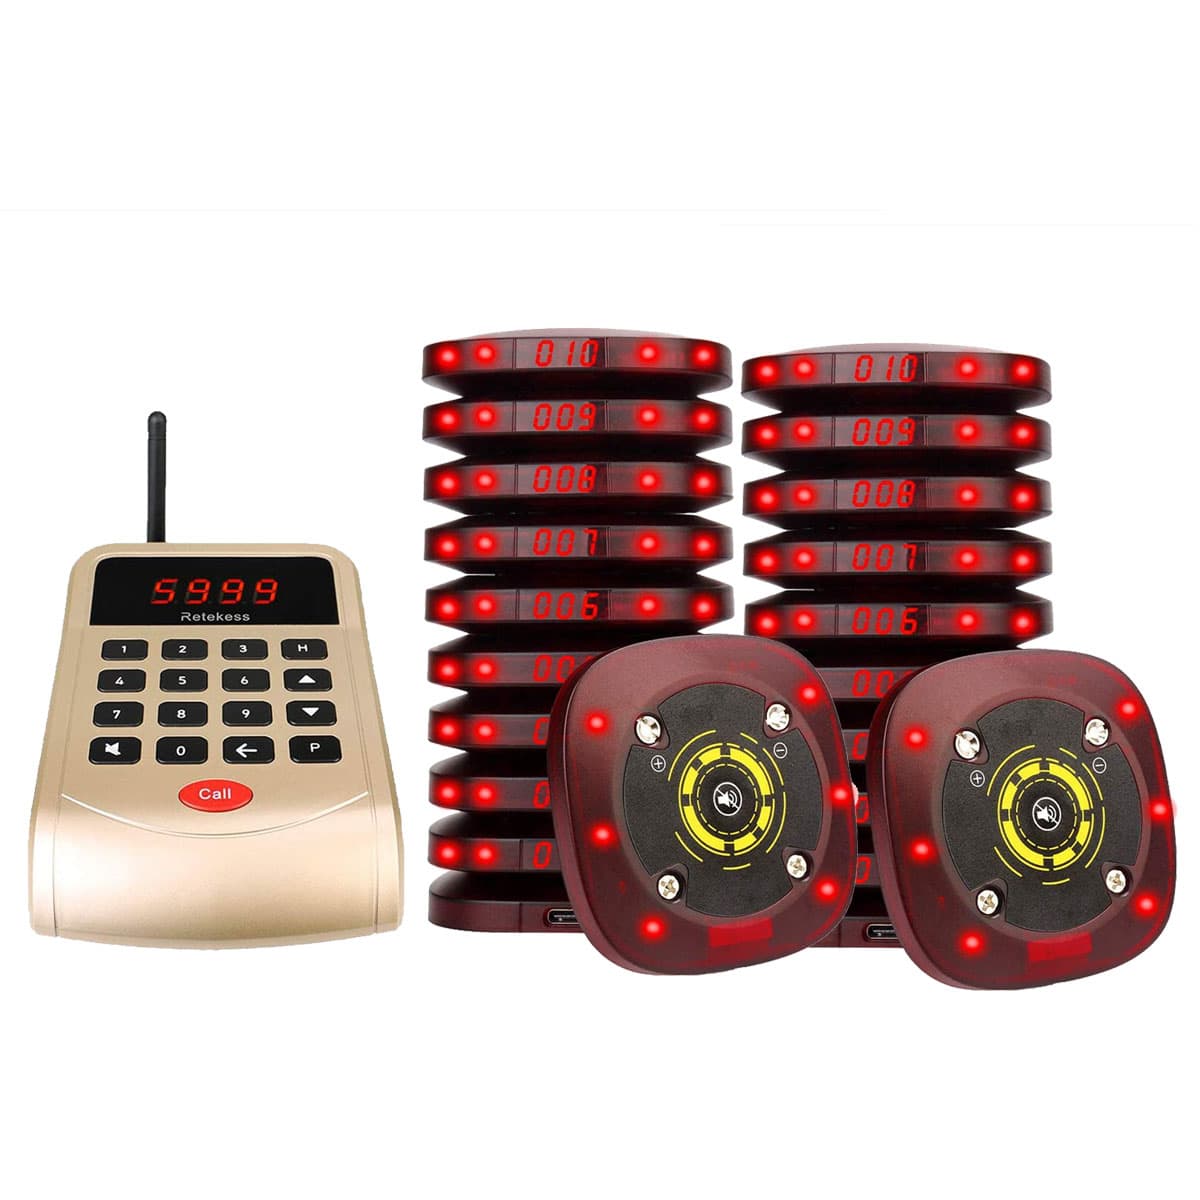 Retekess T118 Wireless Coaster Pager System 999 Channel 1 Keypad + 20 Pagers